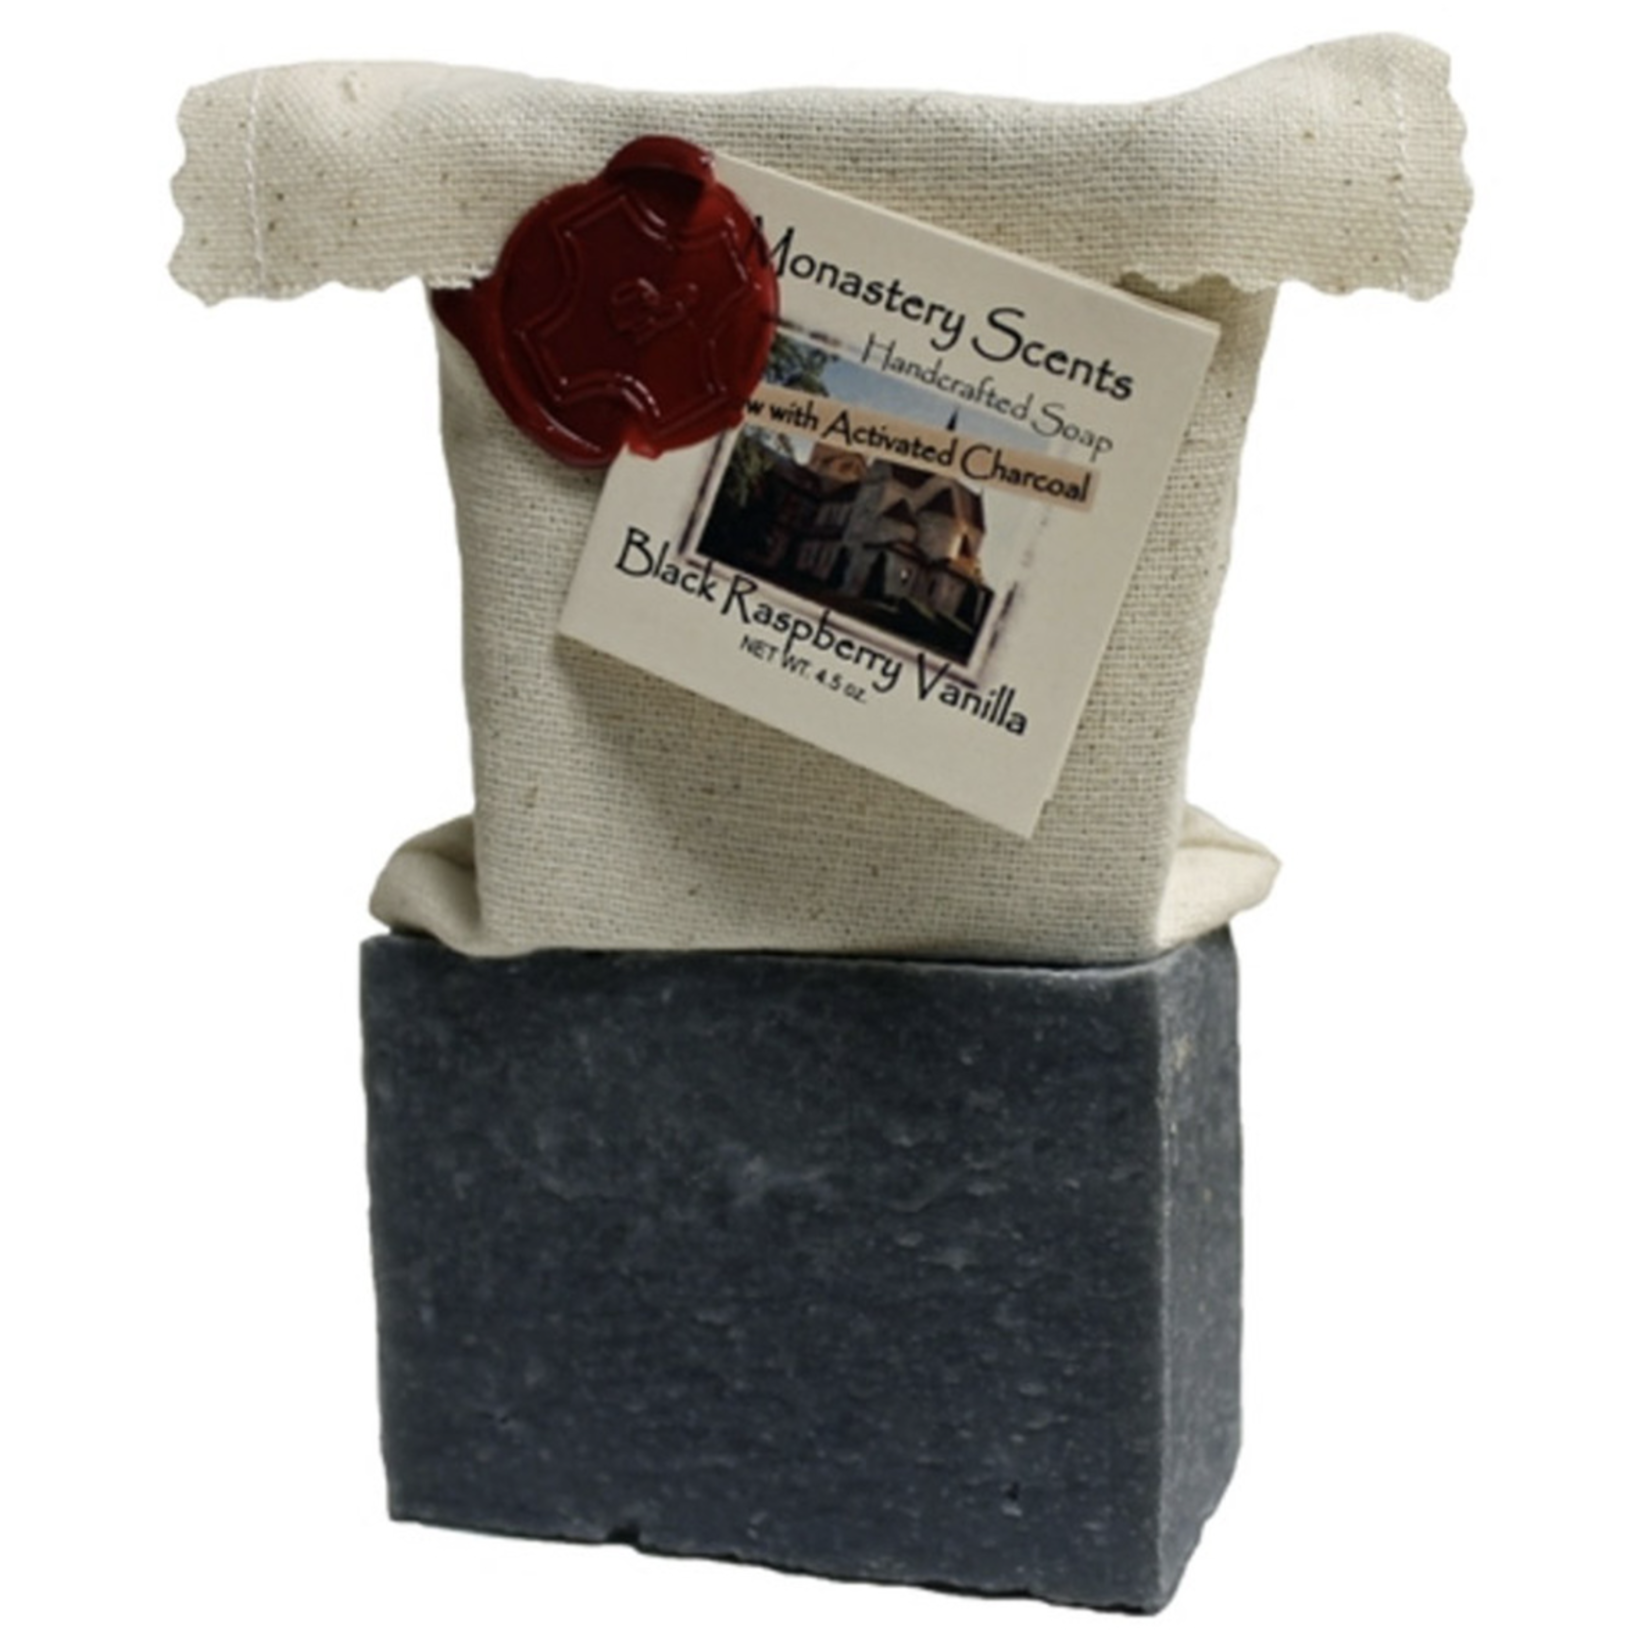 Monastery Creations All Natural Charcoal Soap